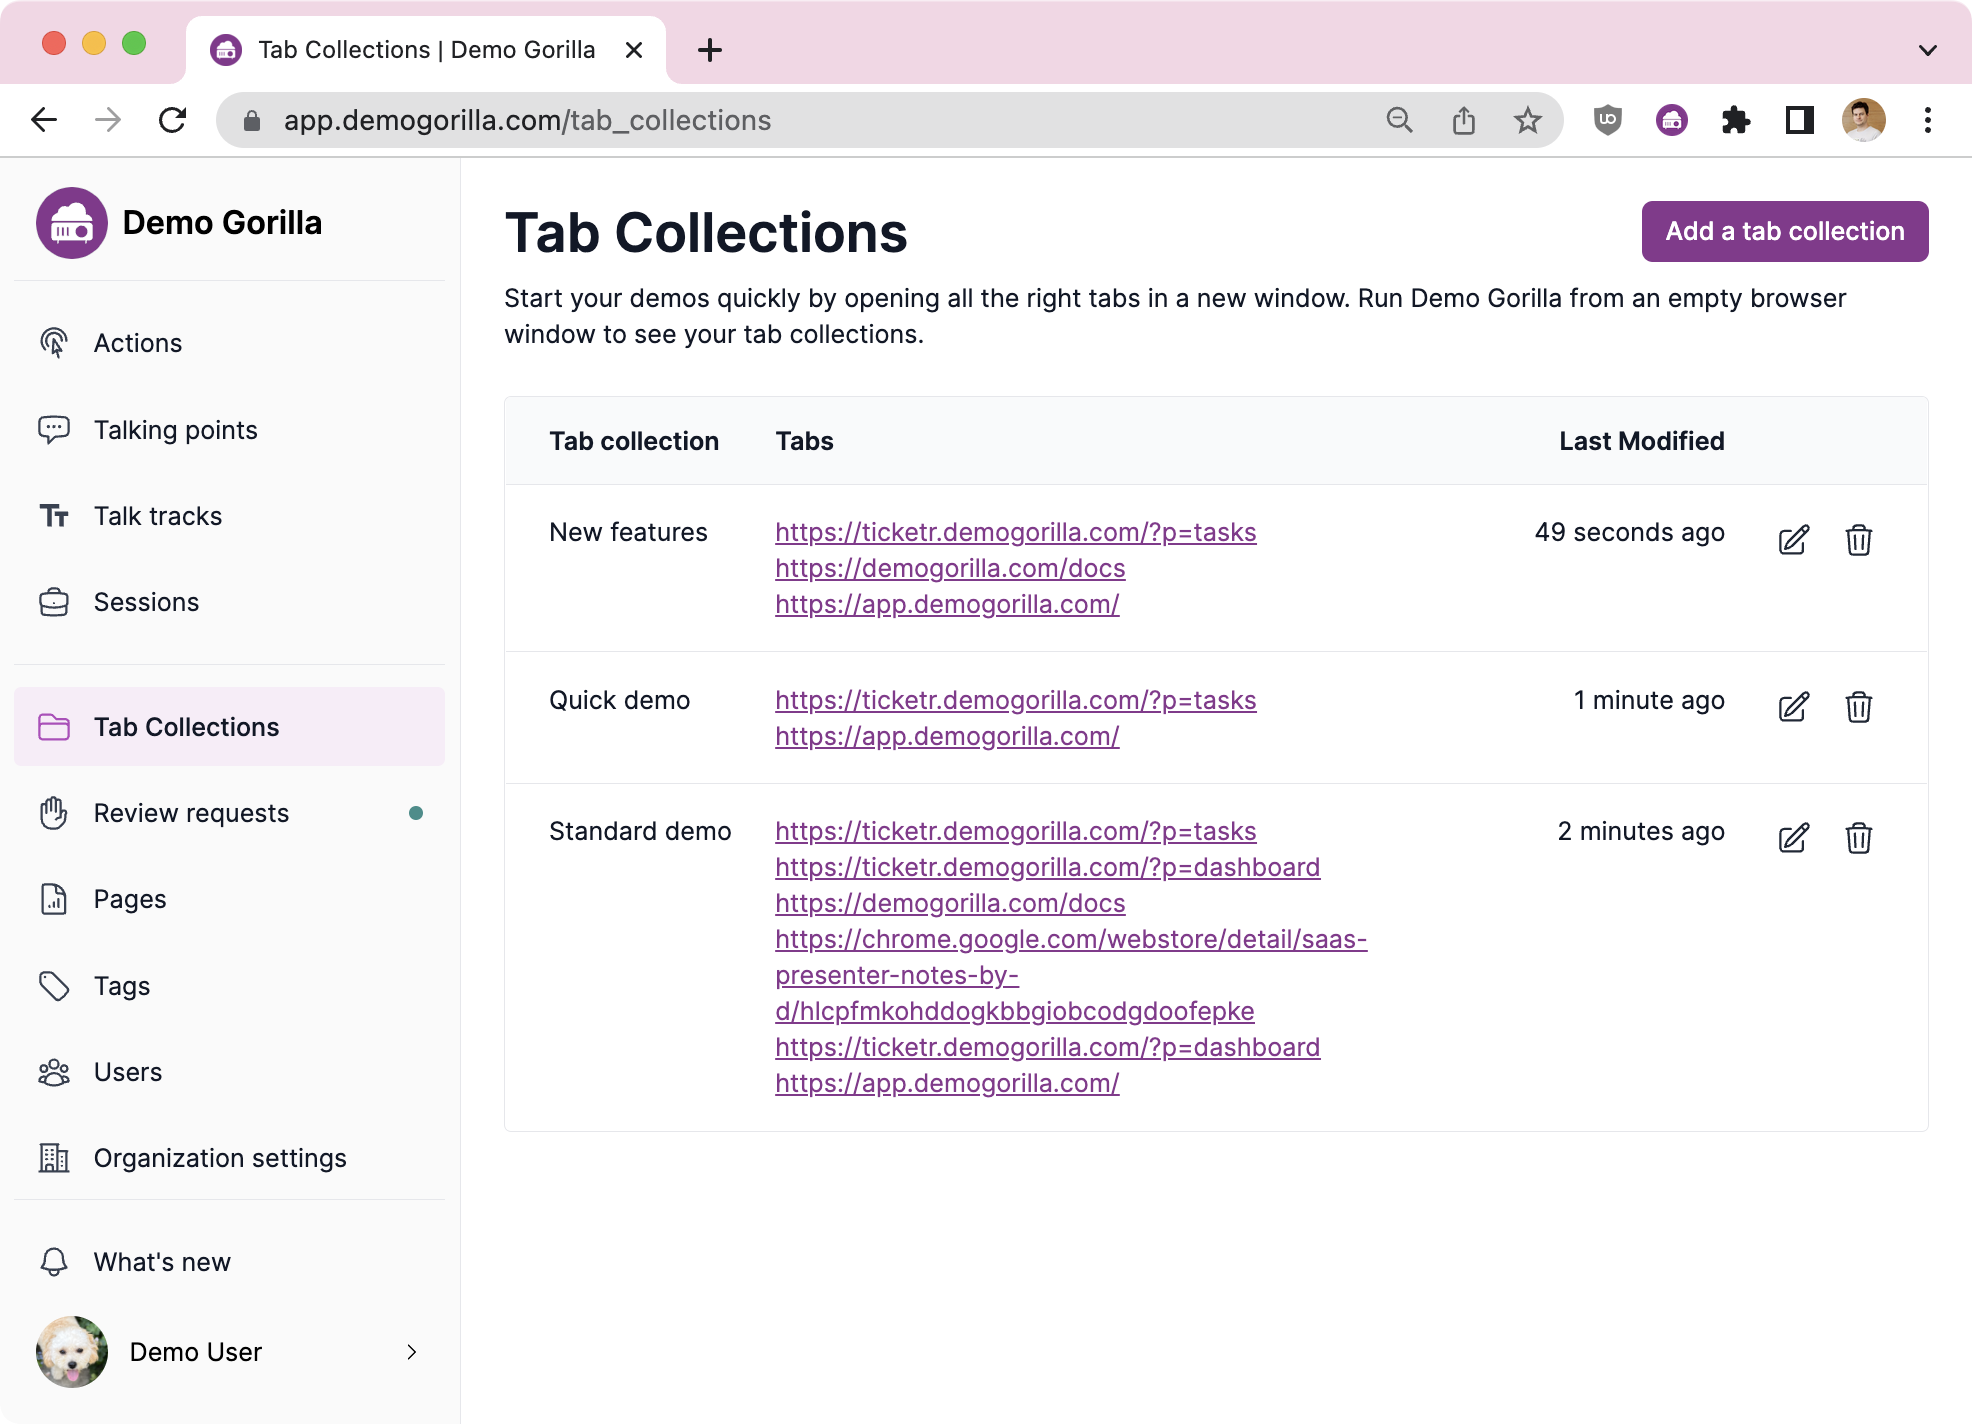 Showing a tab collection